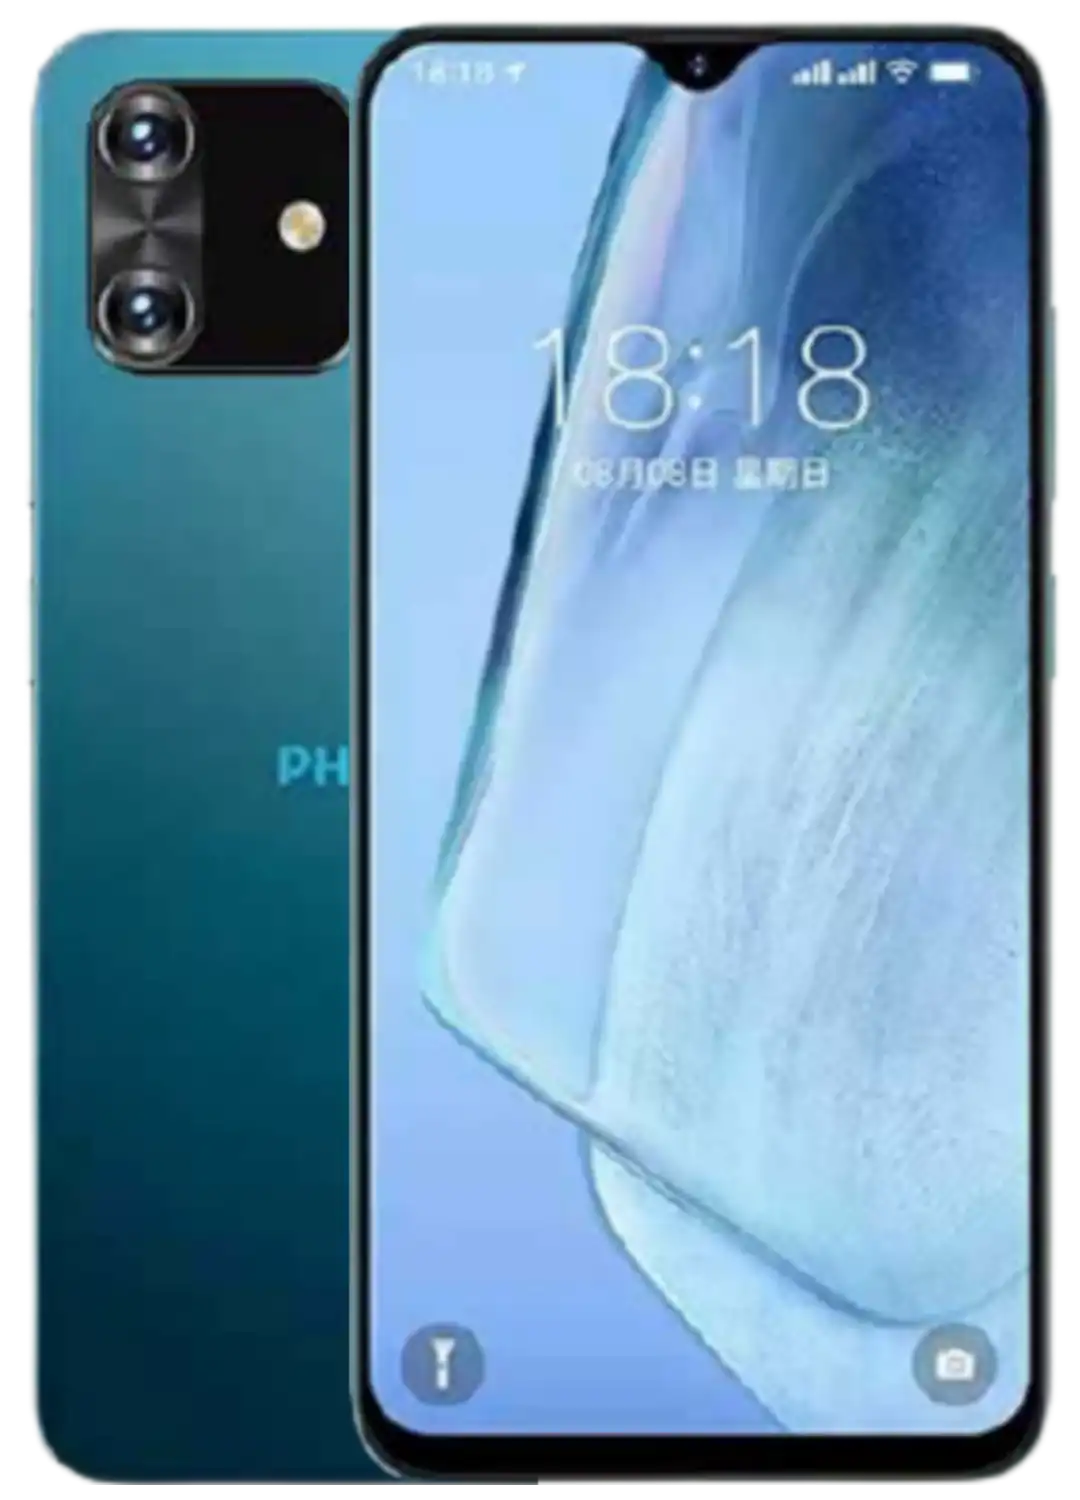 Philips PH2 – Full Specifications